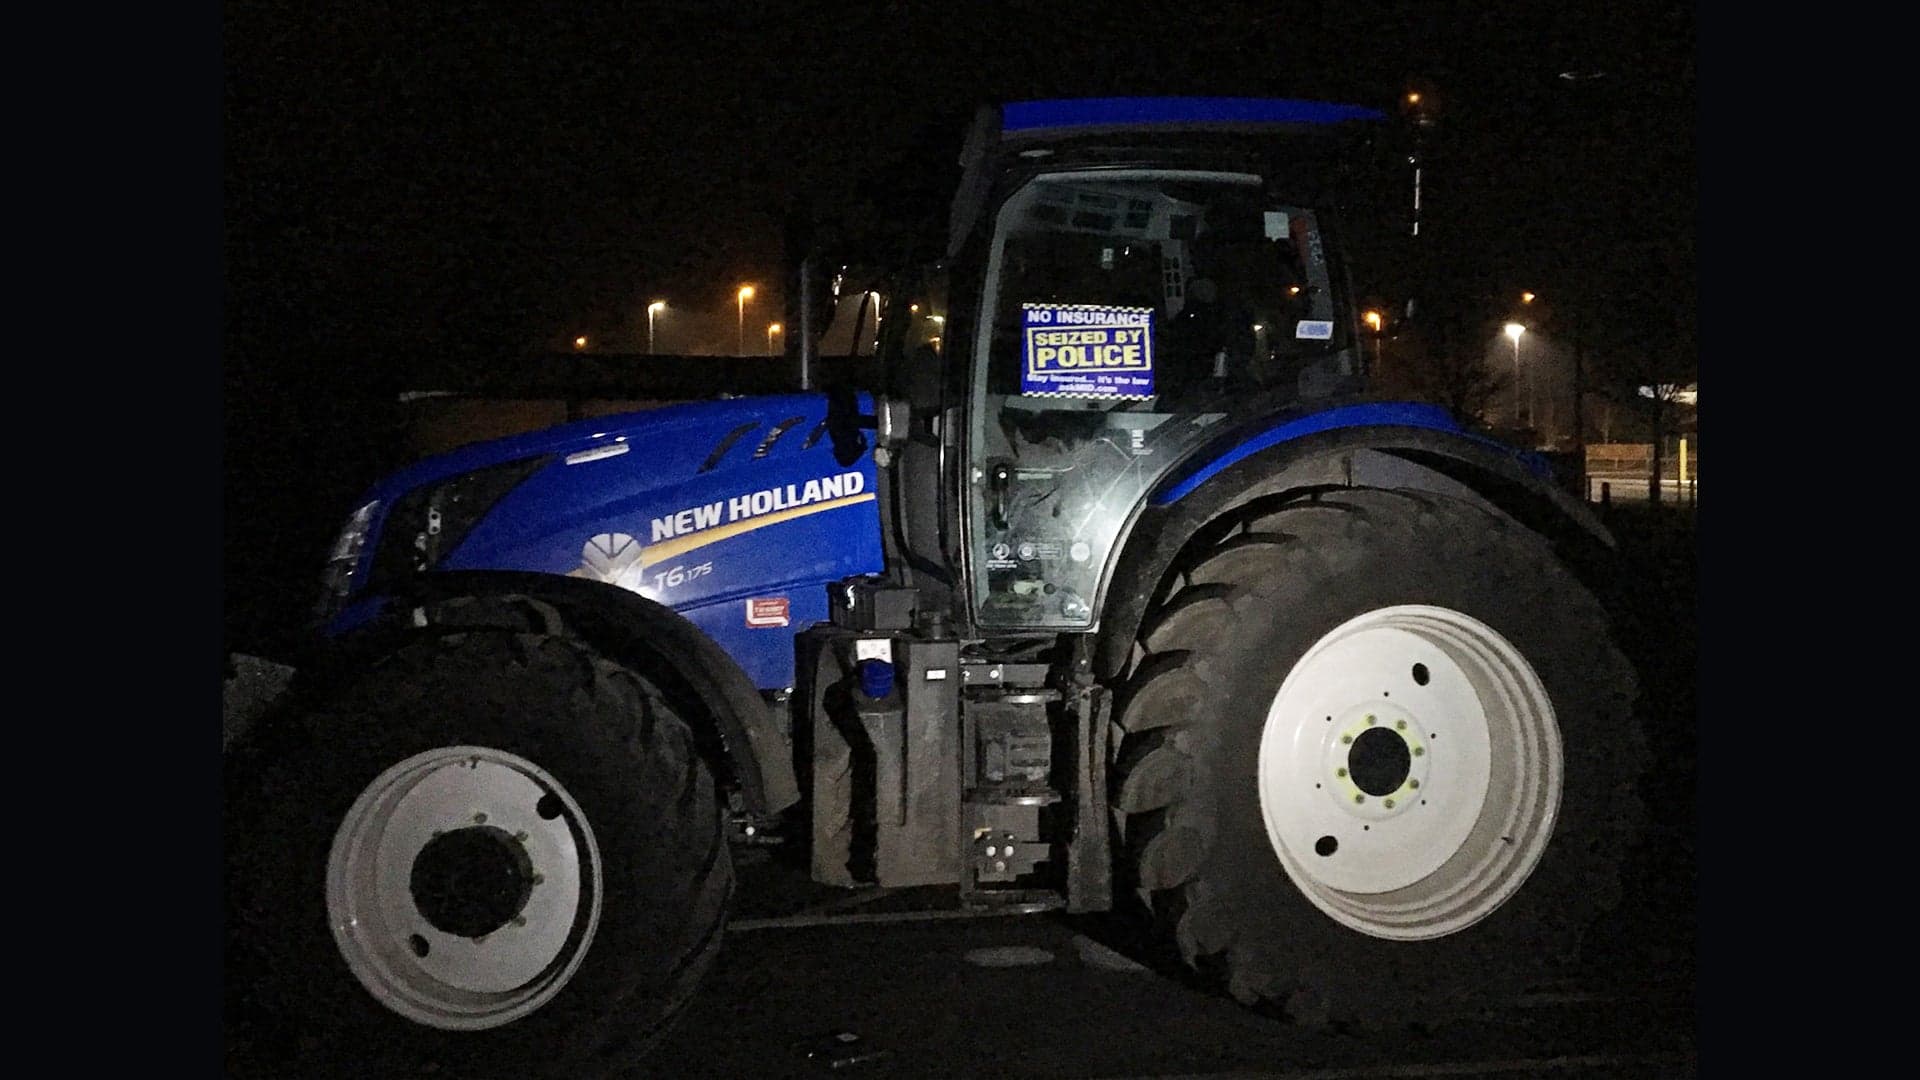 Police Seize New Holland Tractor Caught Street Racing Against Motorcycles